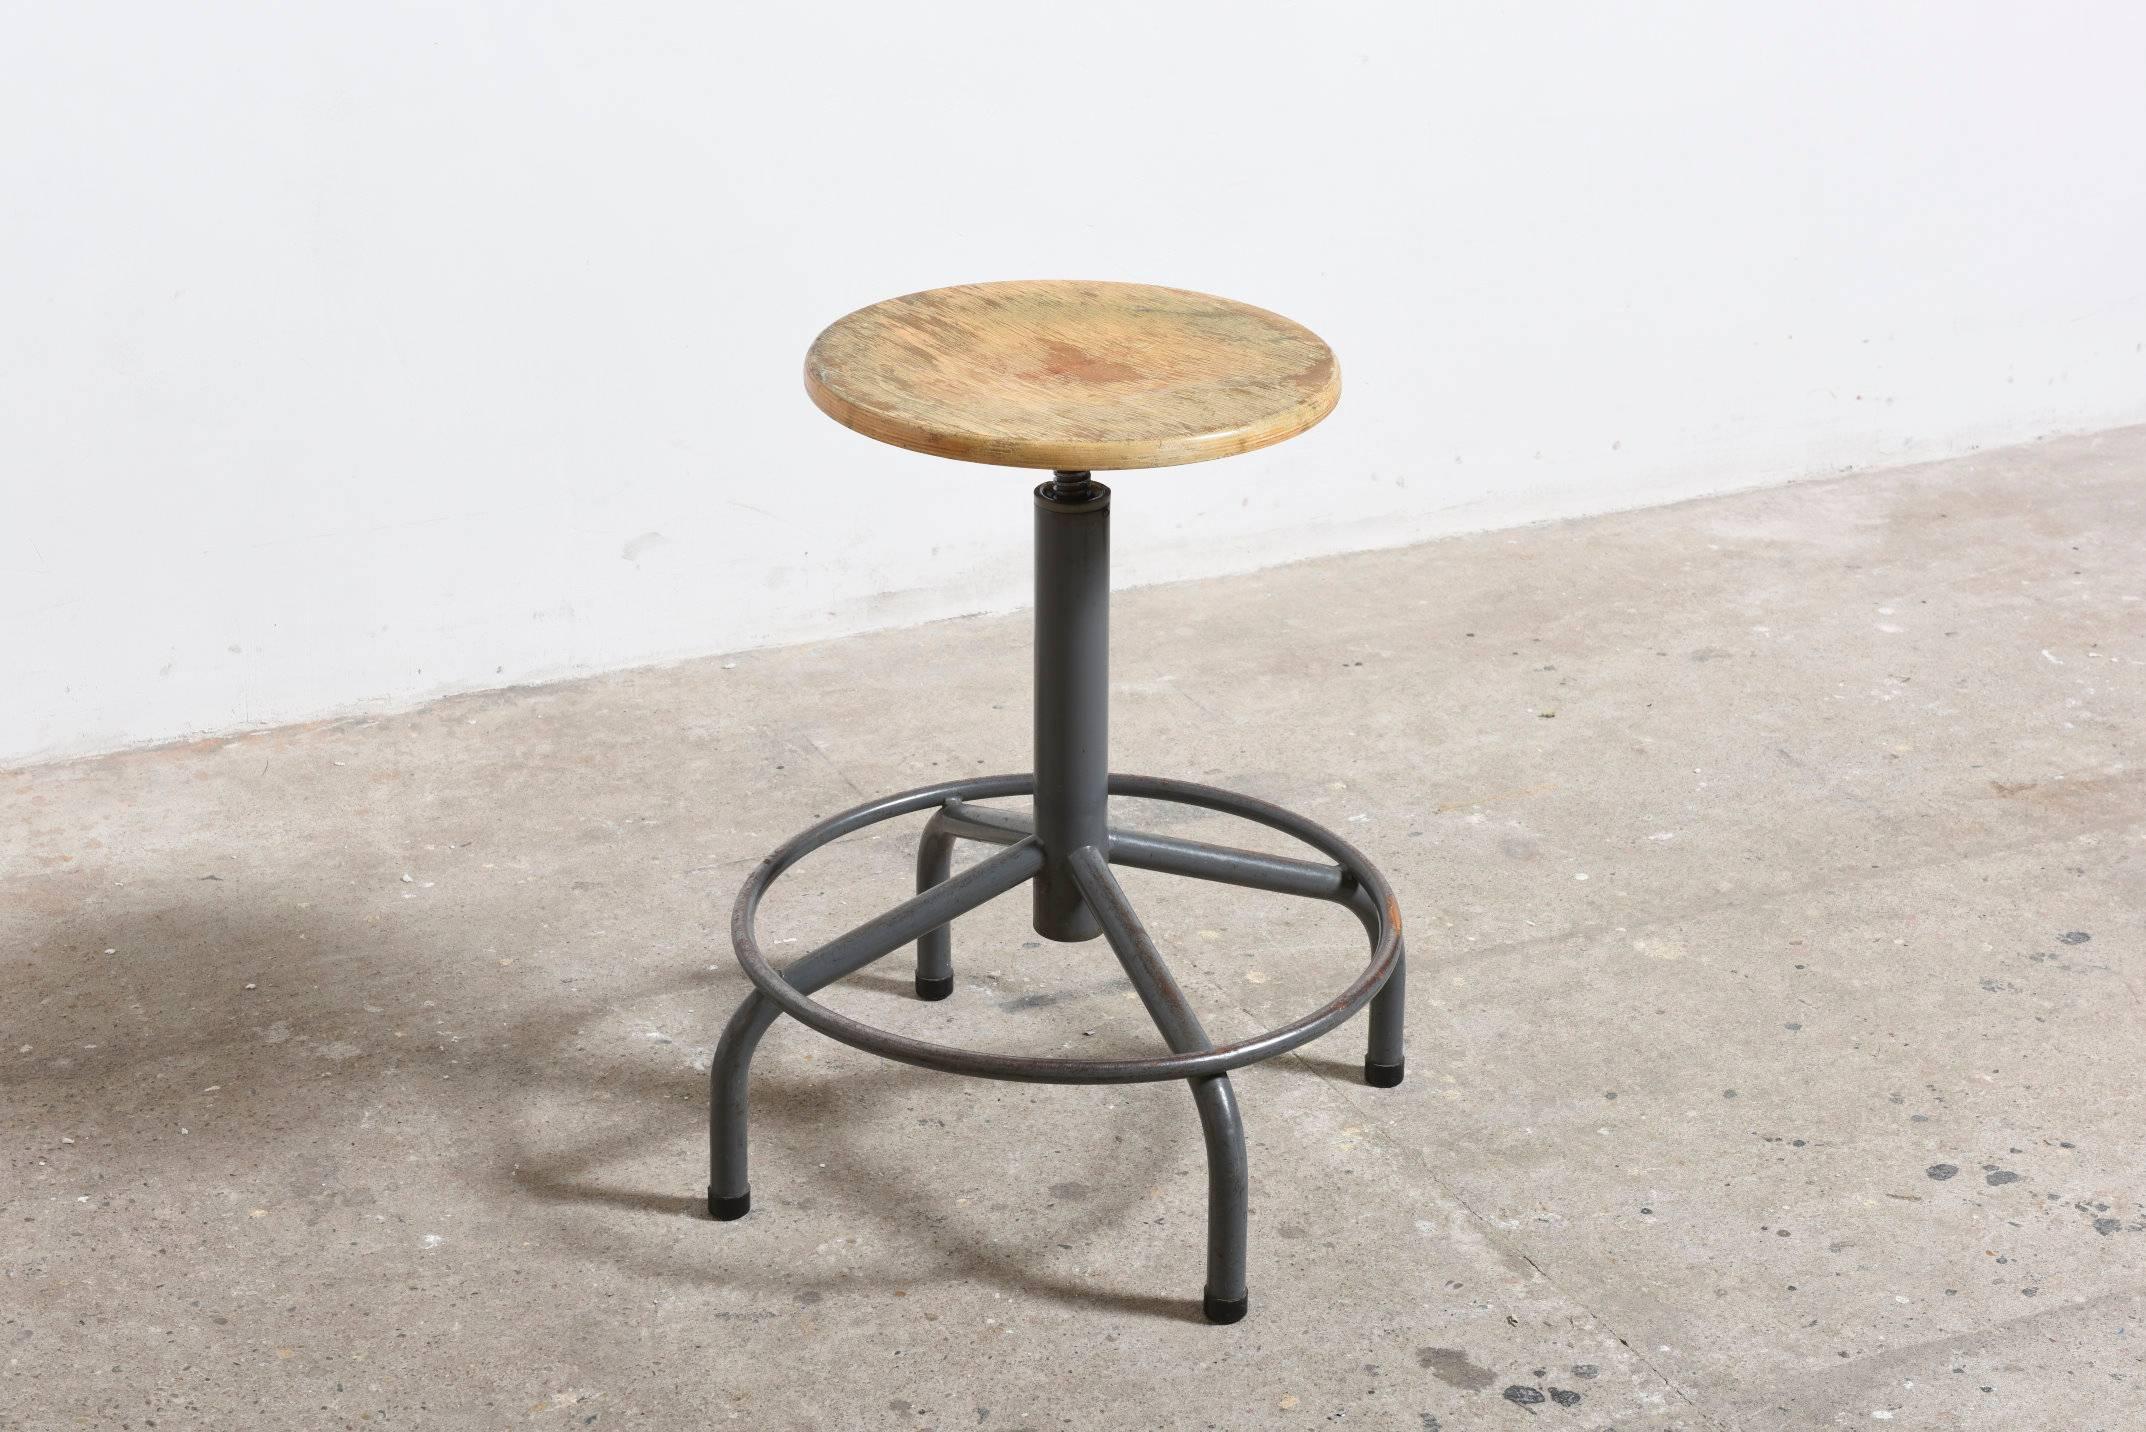 Beautiful rare set of six enameled metal tube and beech seat drafting stools. 
Adjustable height, foot rests and pedestal base with wide spread feet.
All good original condition with visible signs of wear and enamel loss. 

Just very beautiful